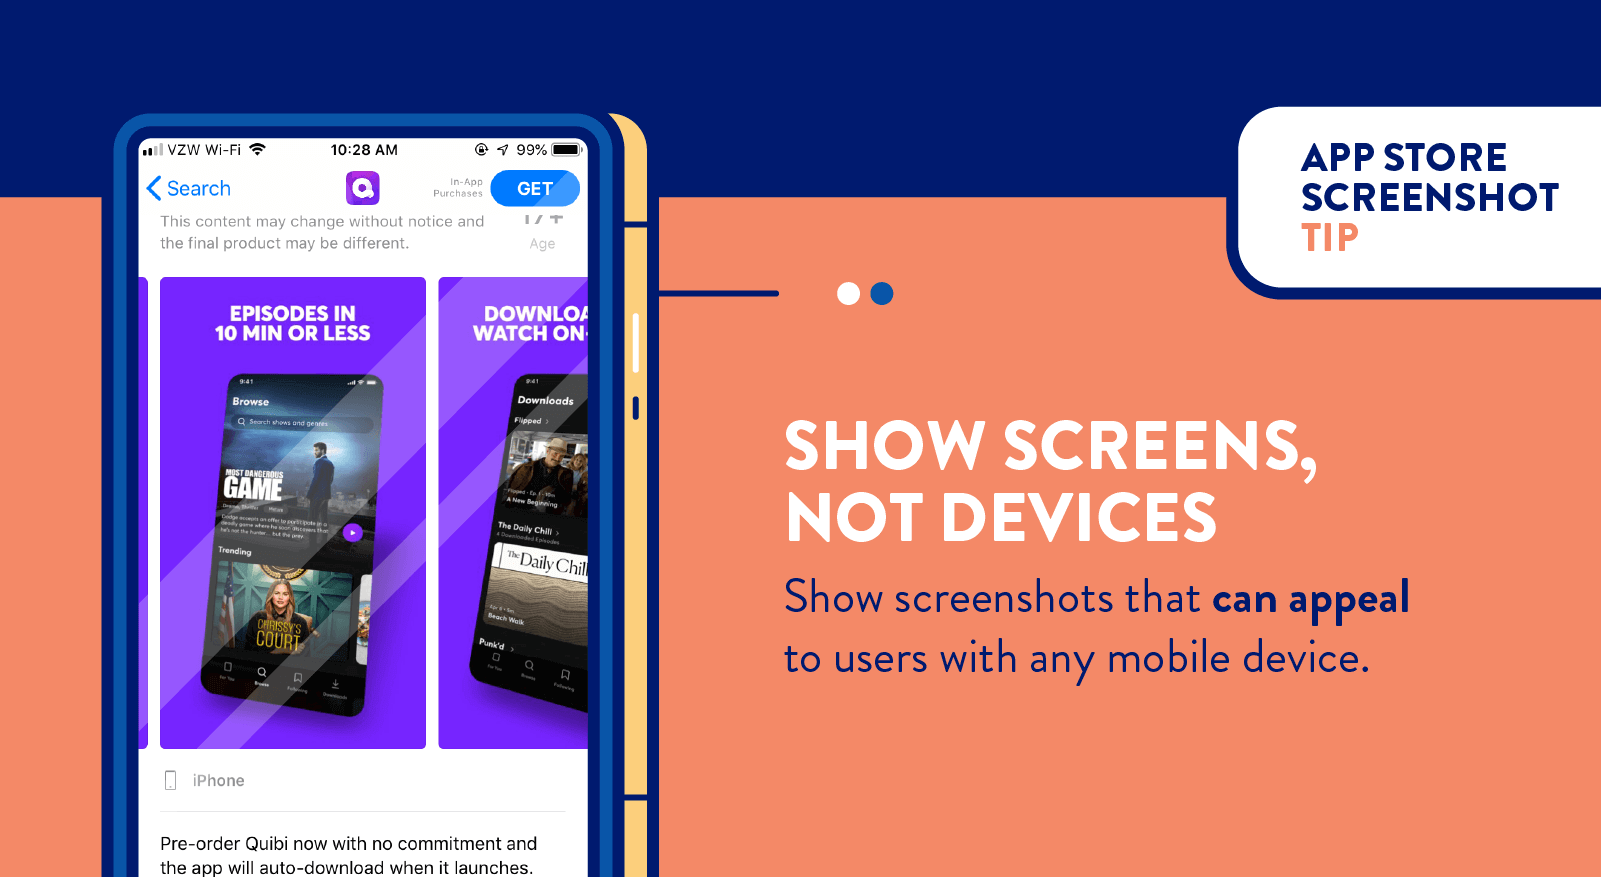 app store screenshots to show screens not devices